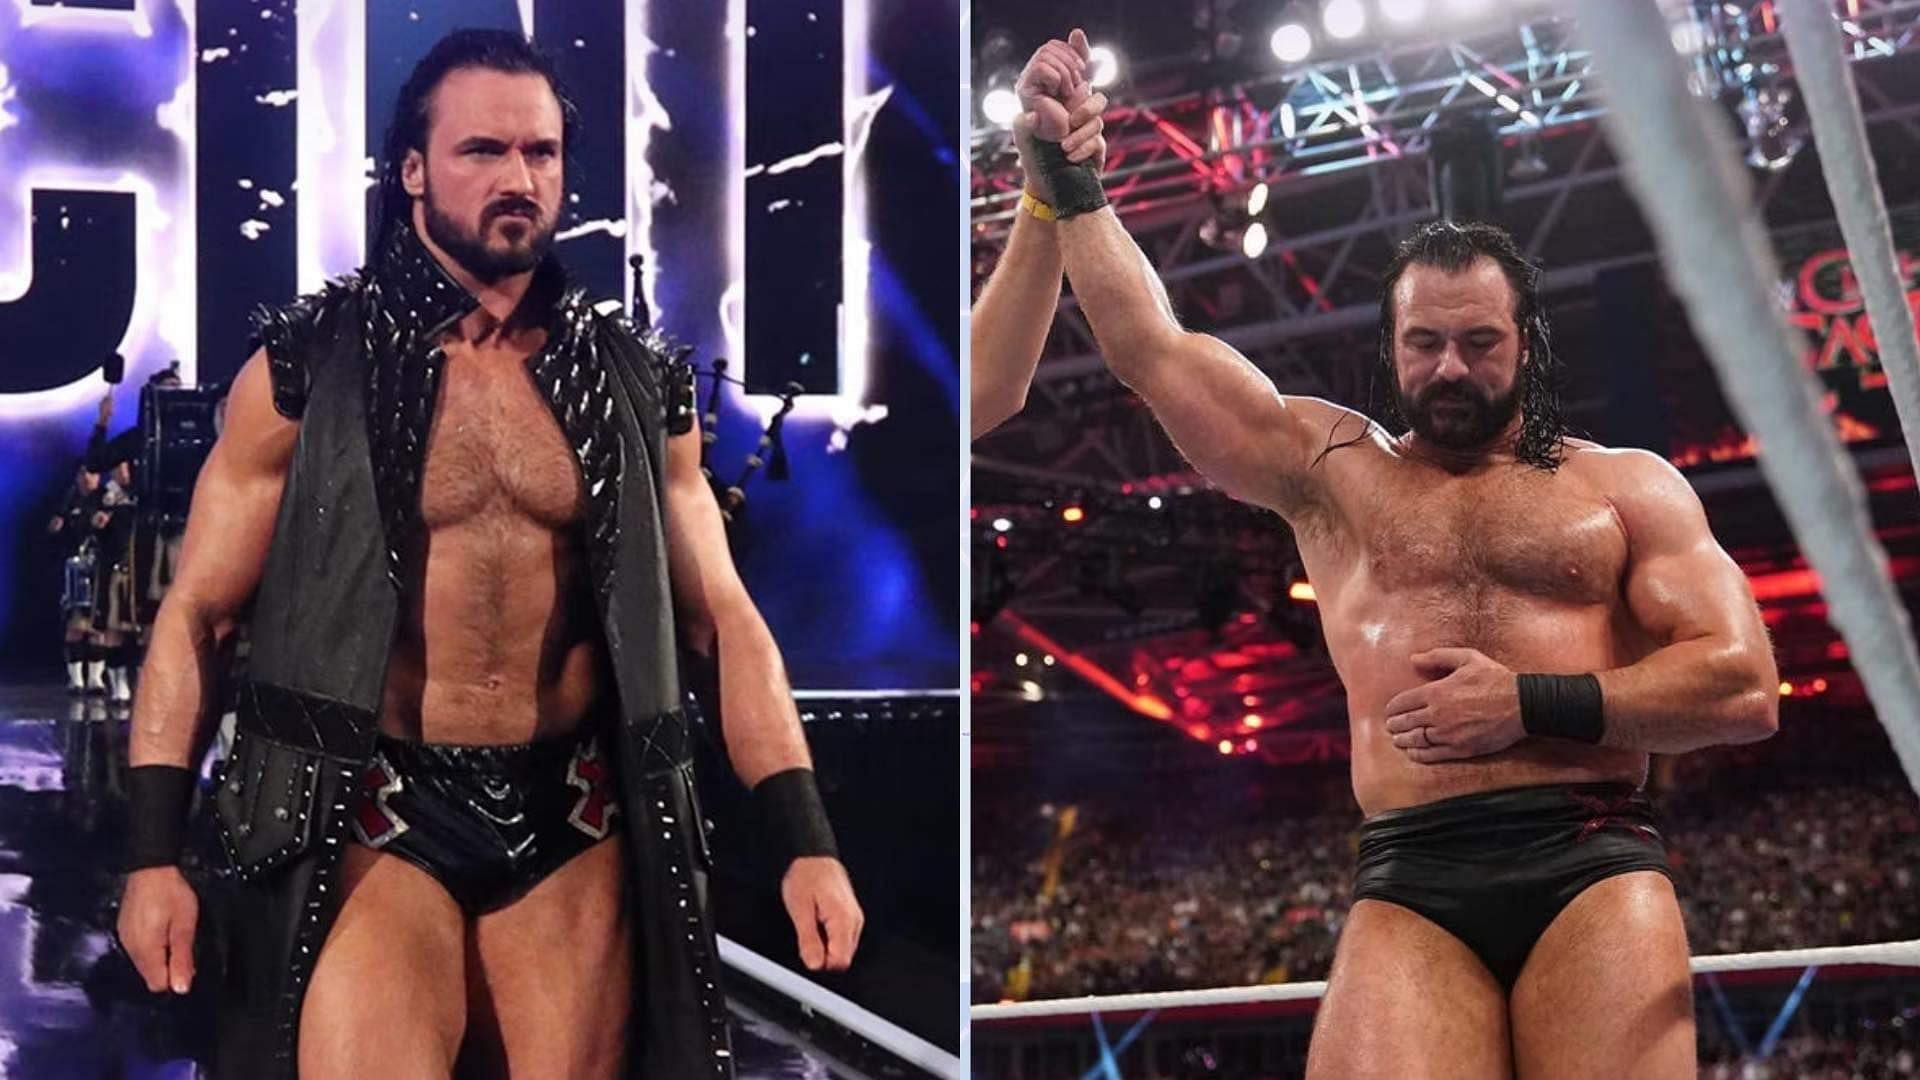 Drew McIntyre is currently one of the most interesting names in the WWE roster